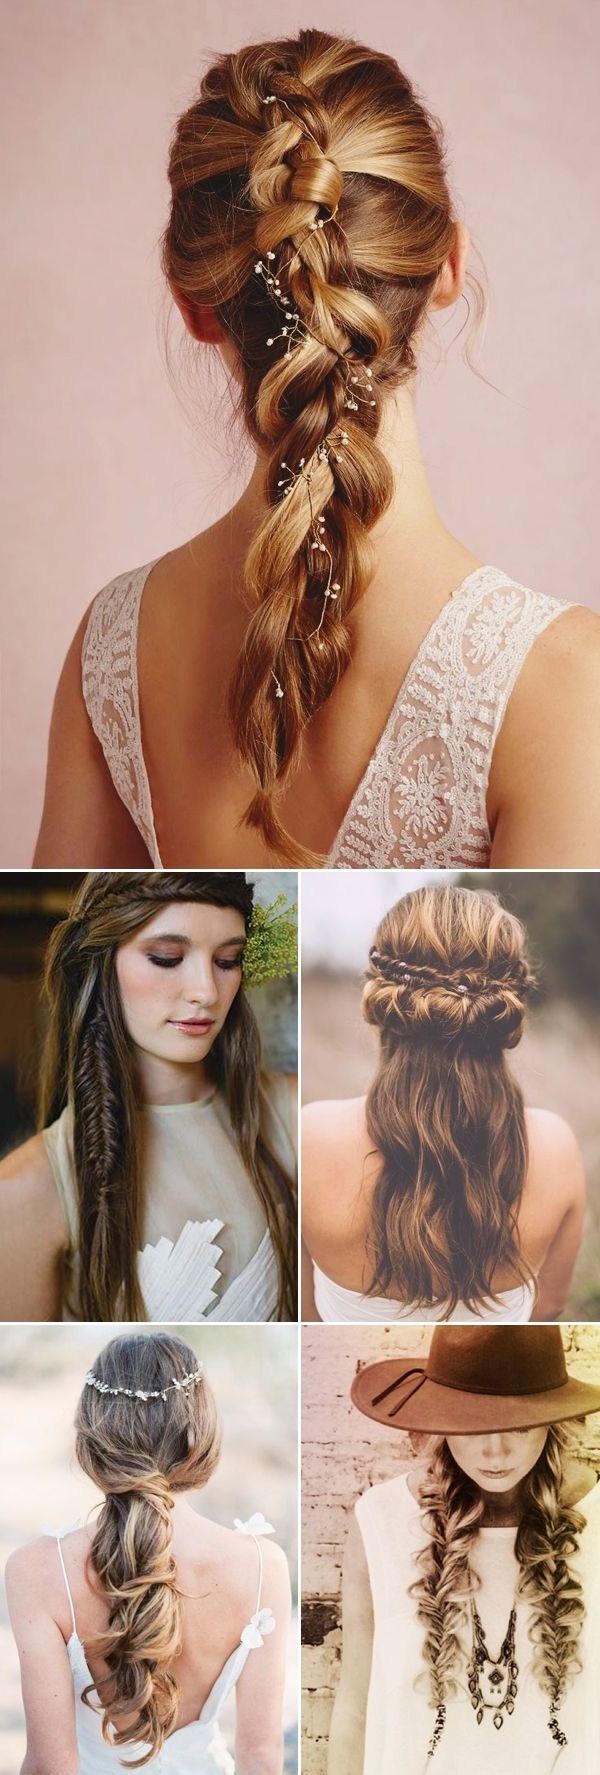 28 Fancy Braided Hairstyles For Long Hair 2016 – Pretty Designs For Well Known Braid Hairstyles For Long Hair (View 13 of 15)